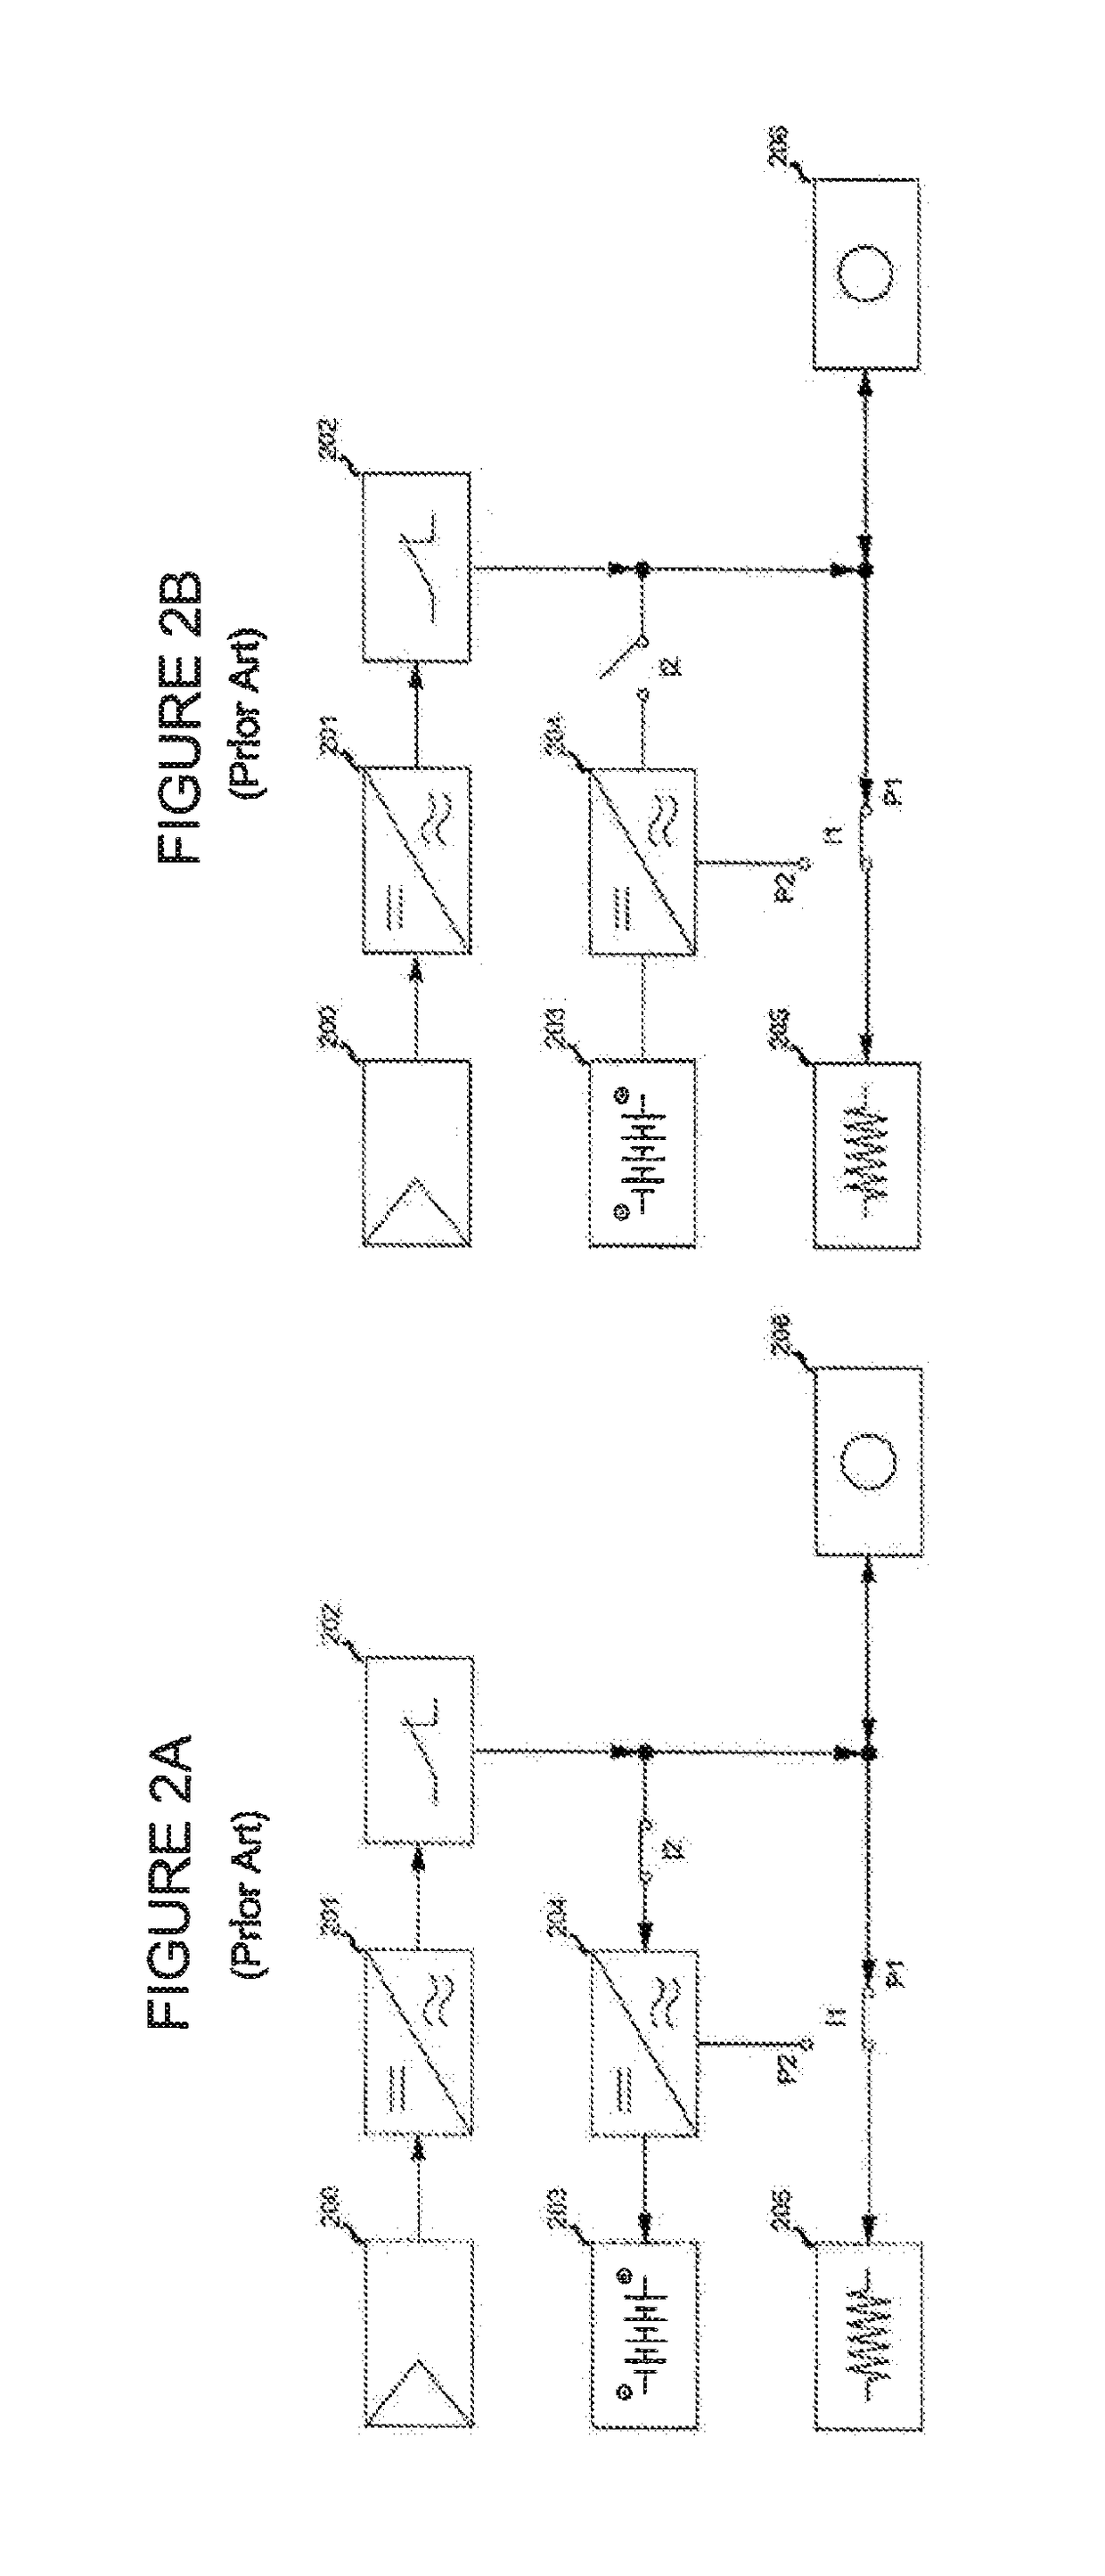 Module for storing/drawing electricity in/from an electric accumulator applicable to photovoltaic systems, a photovoltaic system and a method of upgrading a photovoltaic system